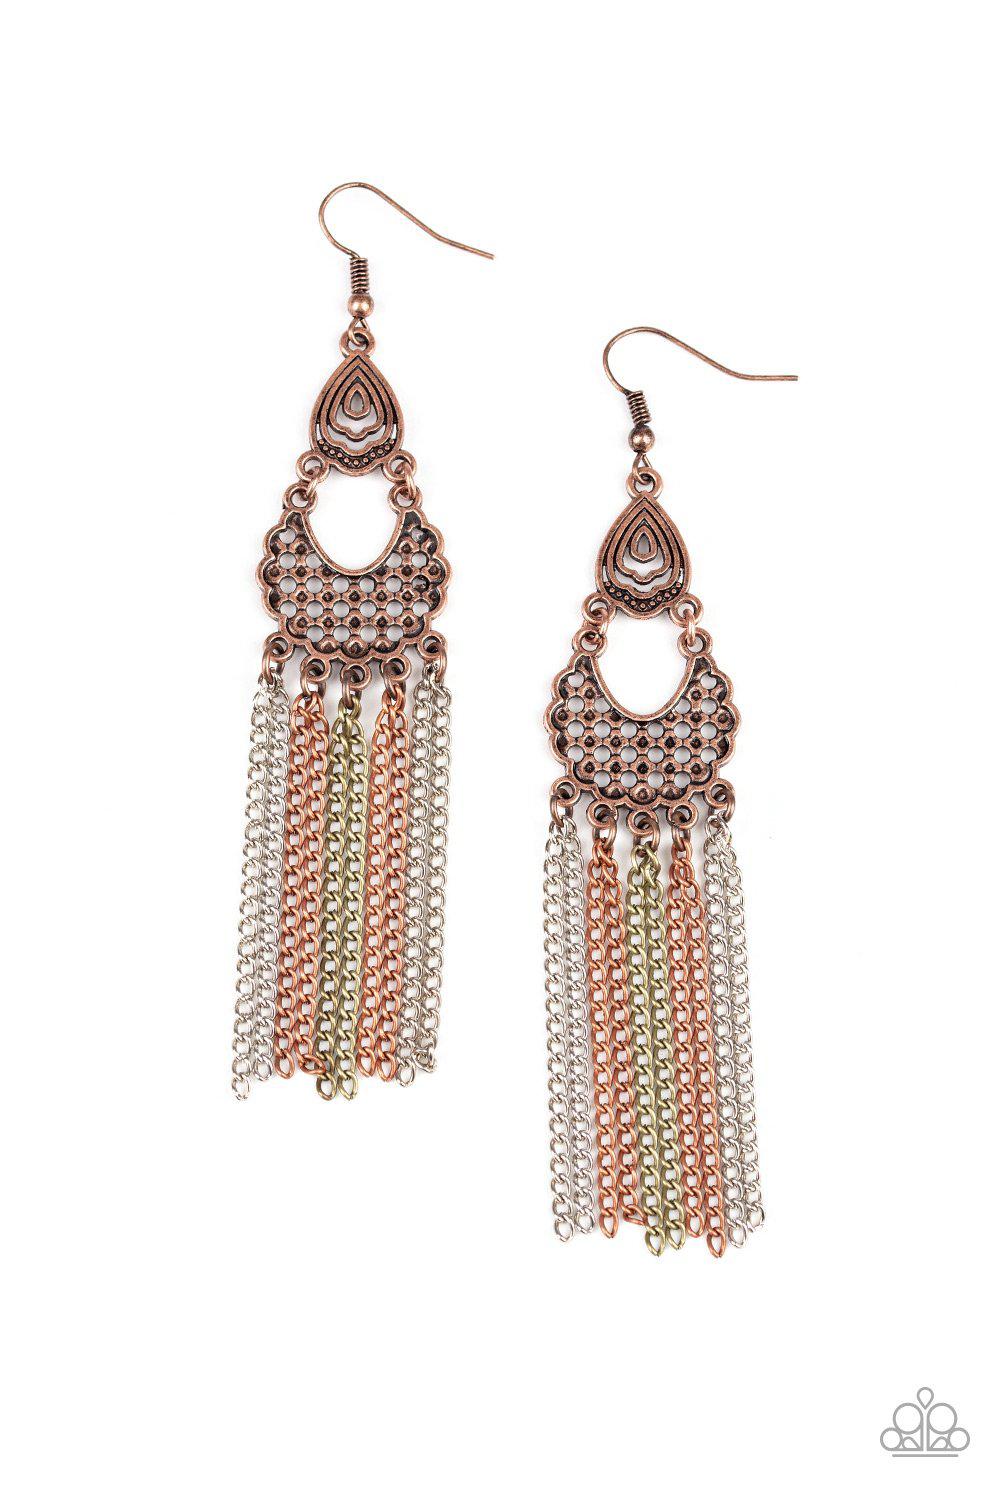 Insane Chain Multi Copper, Silver and Brass Chain Fringe Earrings - Paparazzi Accessories-CarasShop.com - $5 Jewelry by Cara Jewels